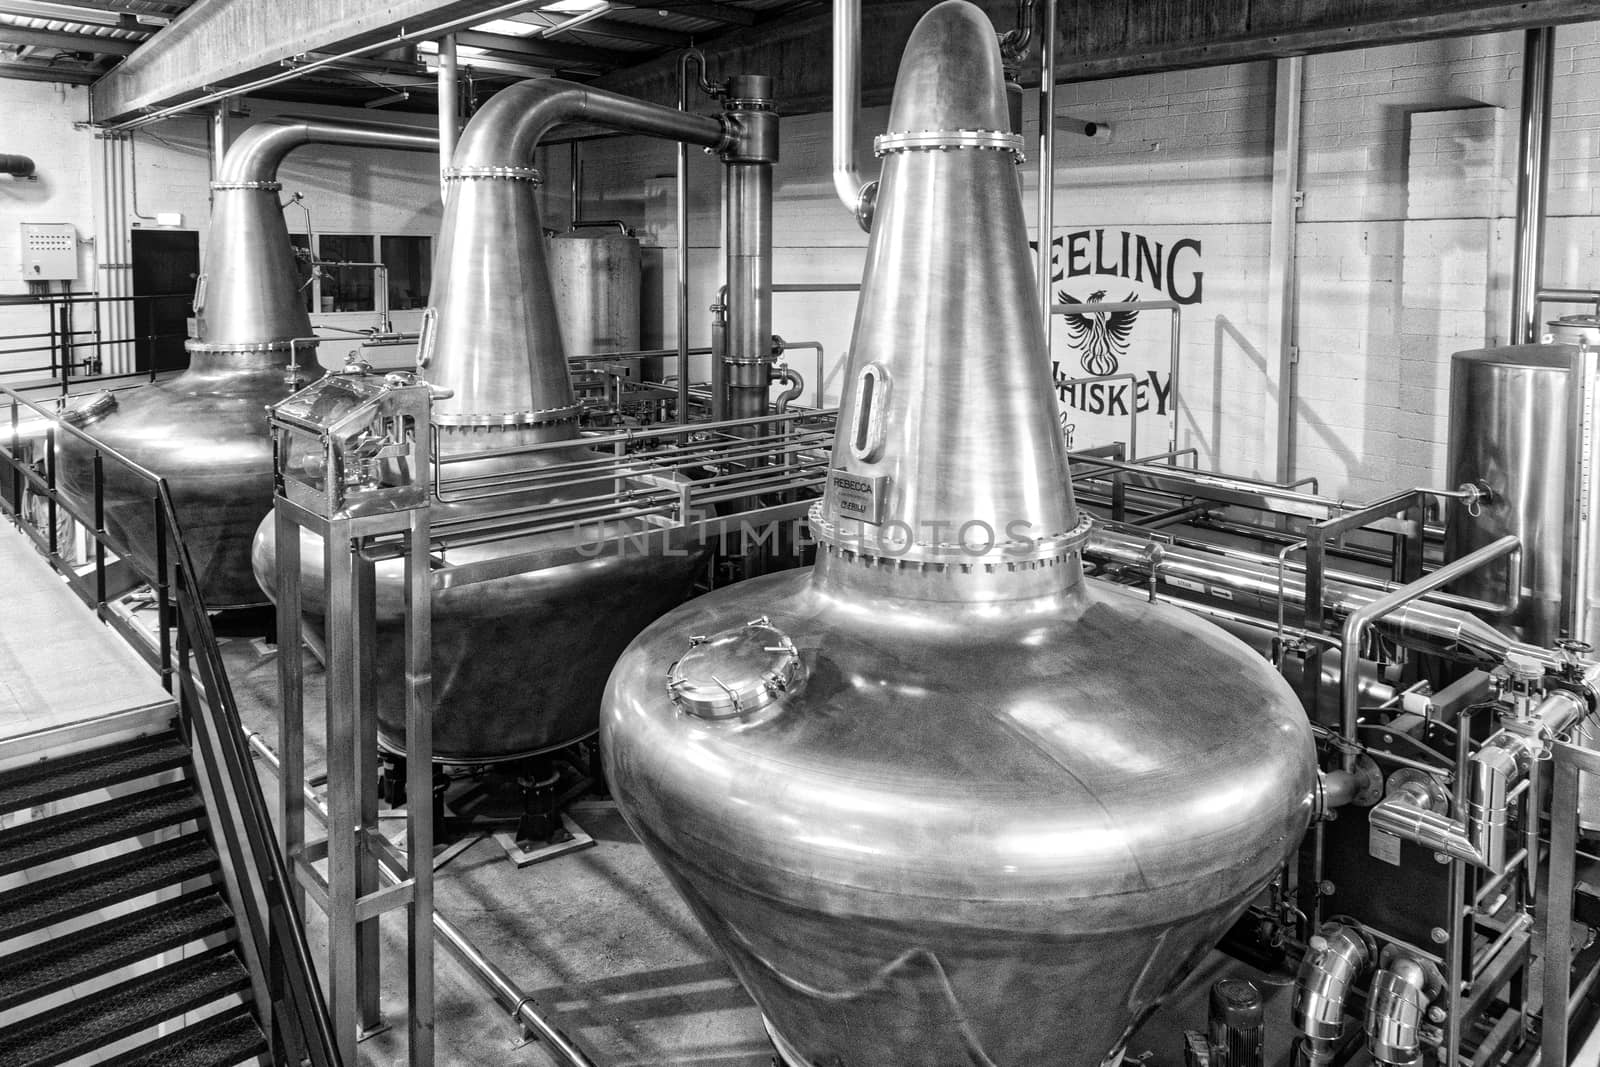 Dublin, Ireland, JAN 20 2017, These are the copper kettles of the Teeling Whiskey distillery . One of the original Dublin Whiskeys. Picture in Black and White